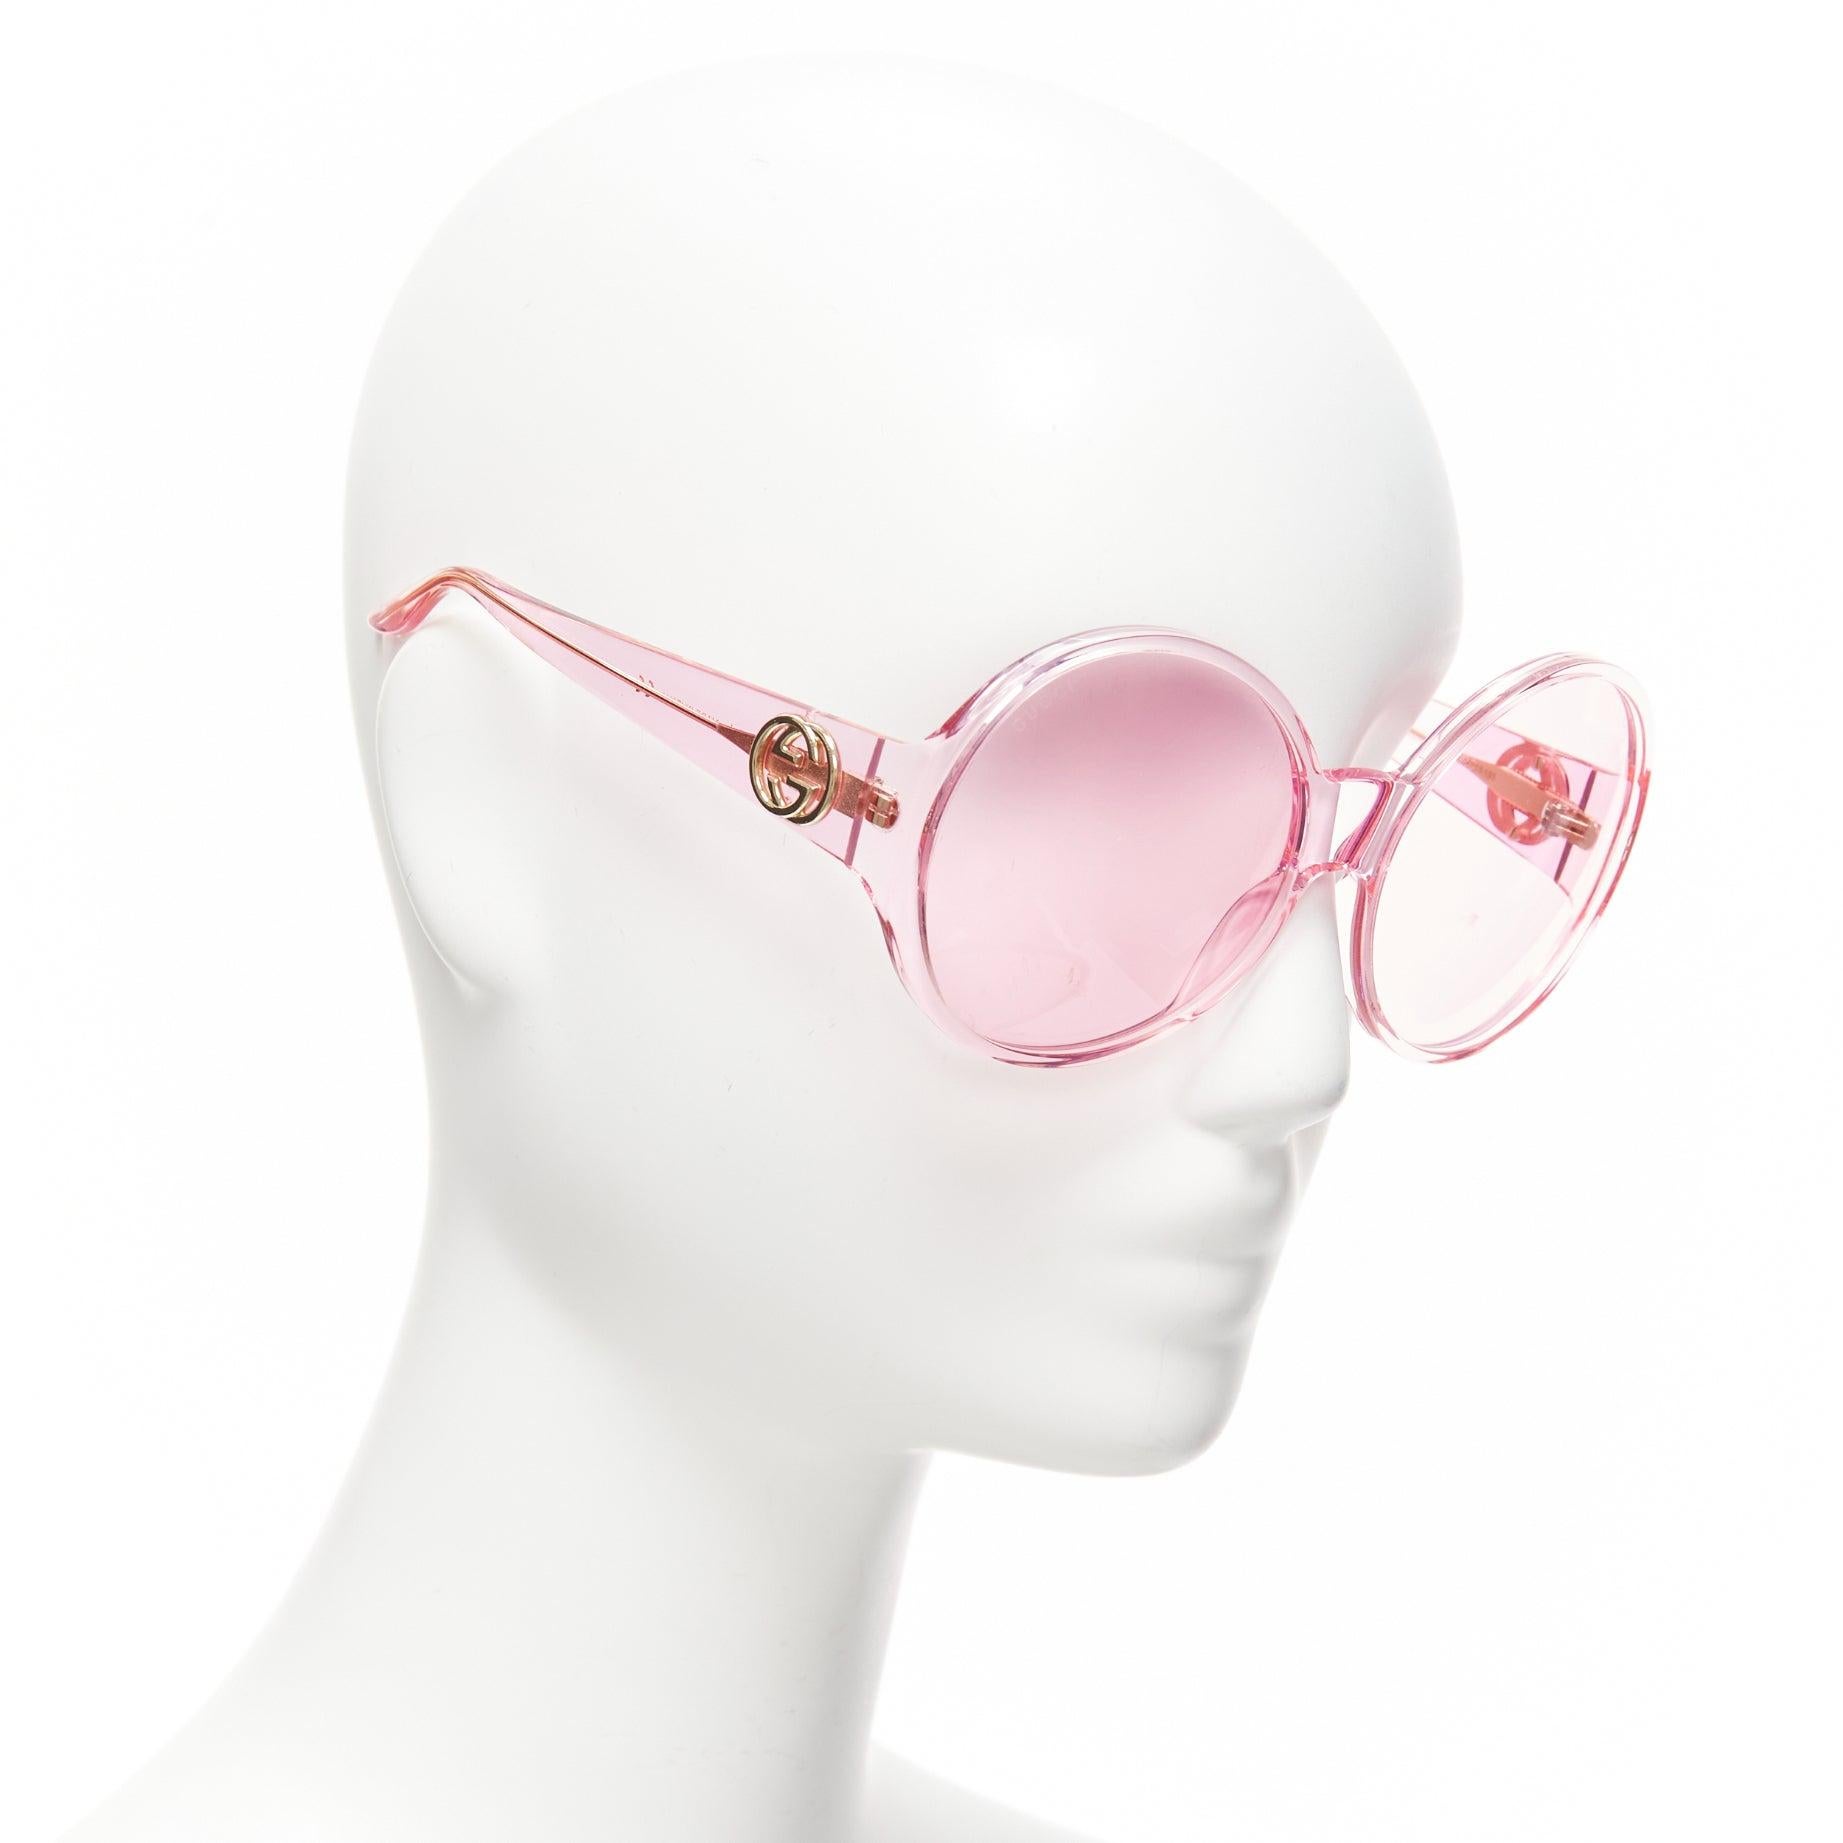 GUCCI Alessandro Michele GG0954S pink hue round frame oversized sunnies
Reference: TGAS/D01038
Brand: Gucci
Designer: Alessandro Michele
Model: GG0954S
Material: Acetate
Color: Pink, Gold
Pattern: Solid
Lining: Pink Acetate
Extra Details: Logos at